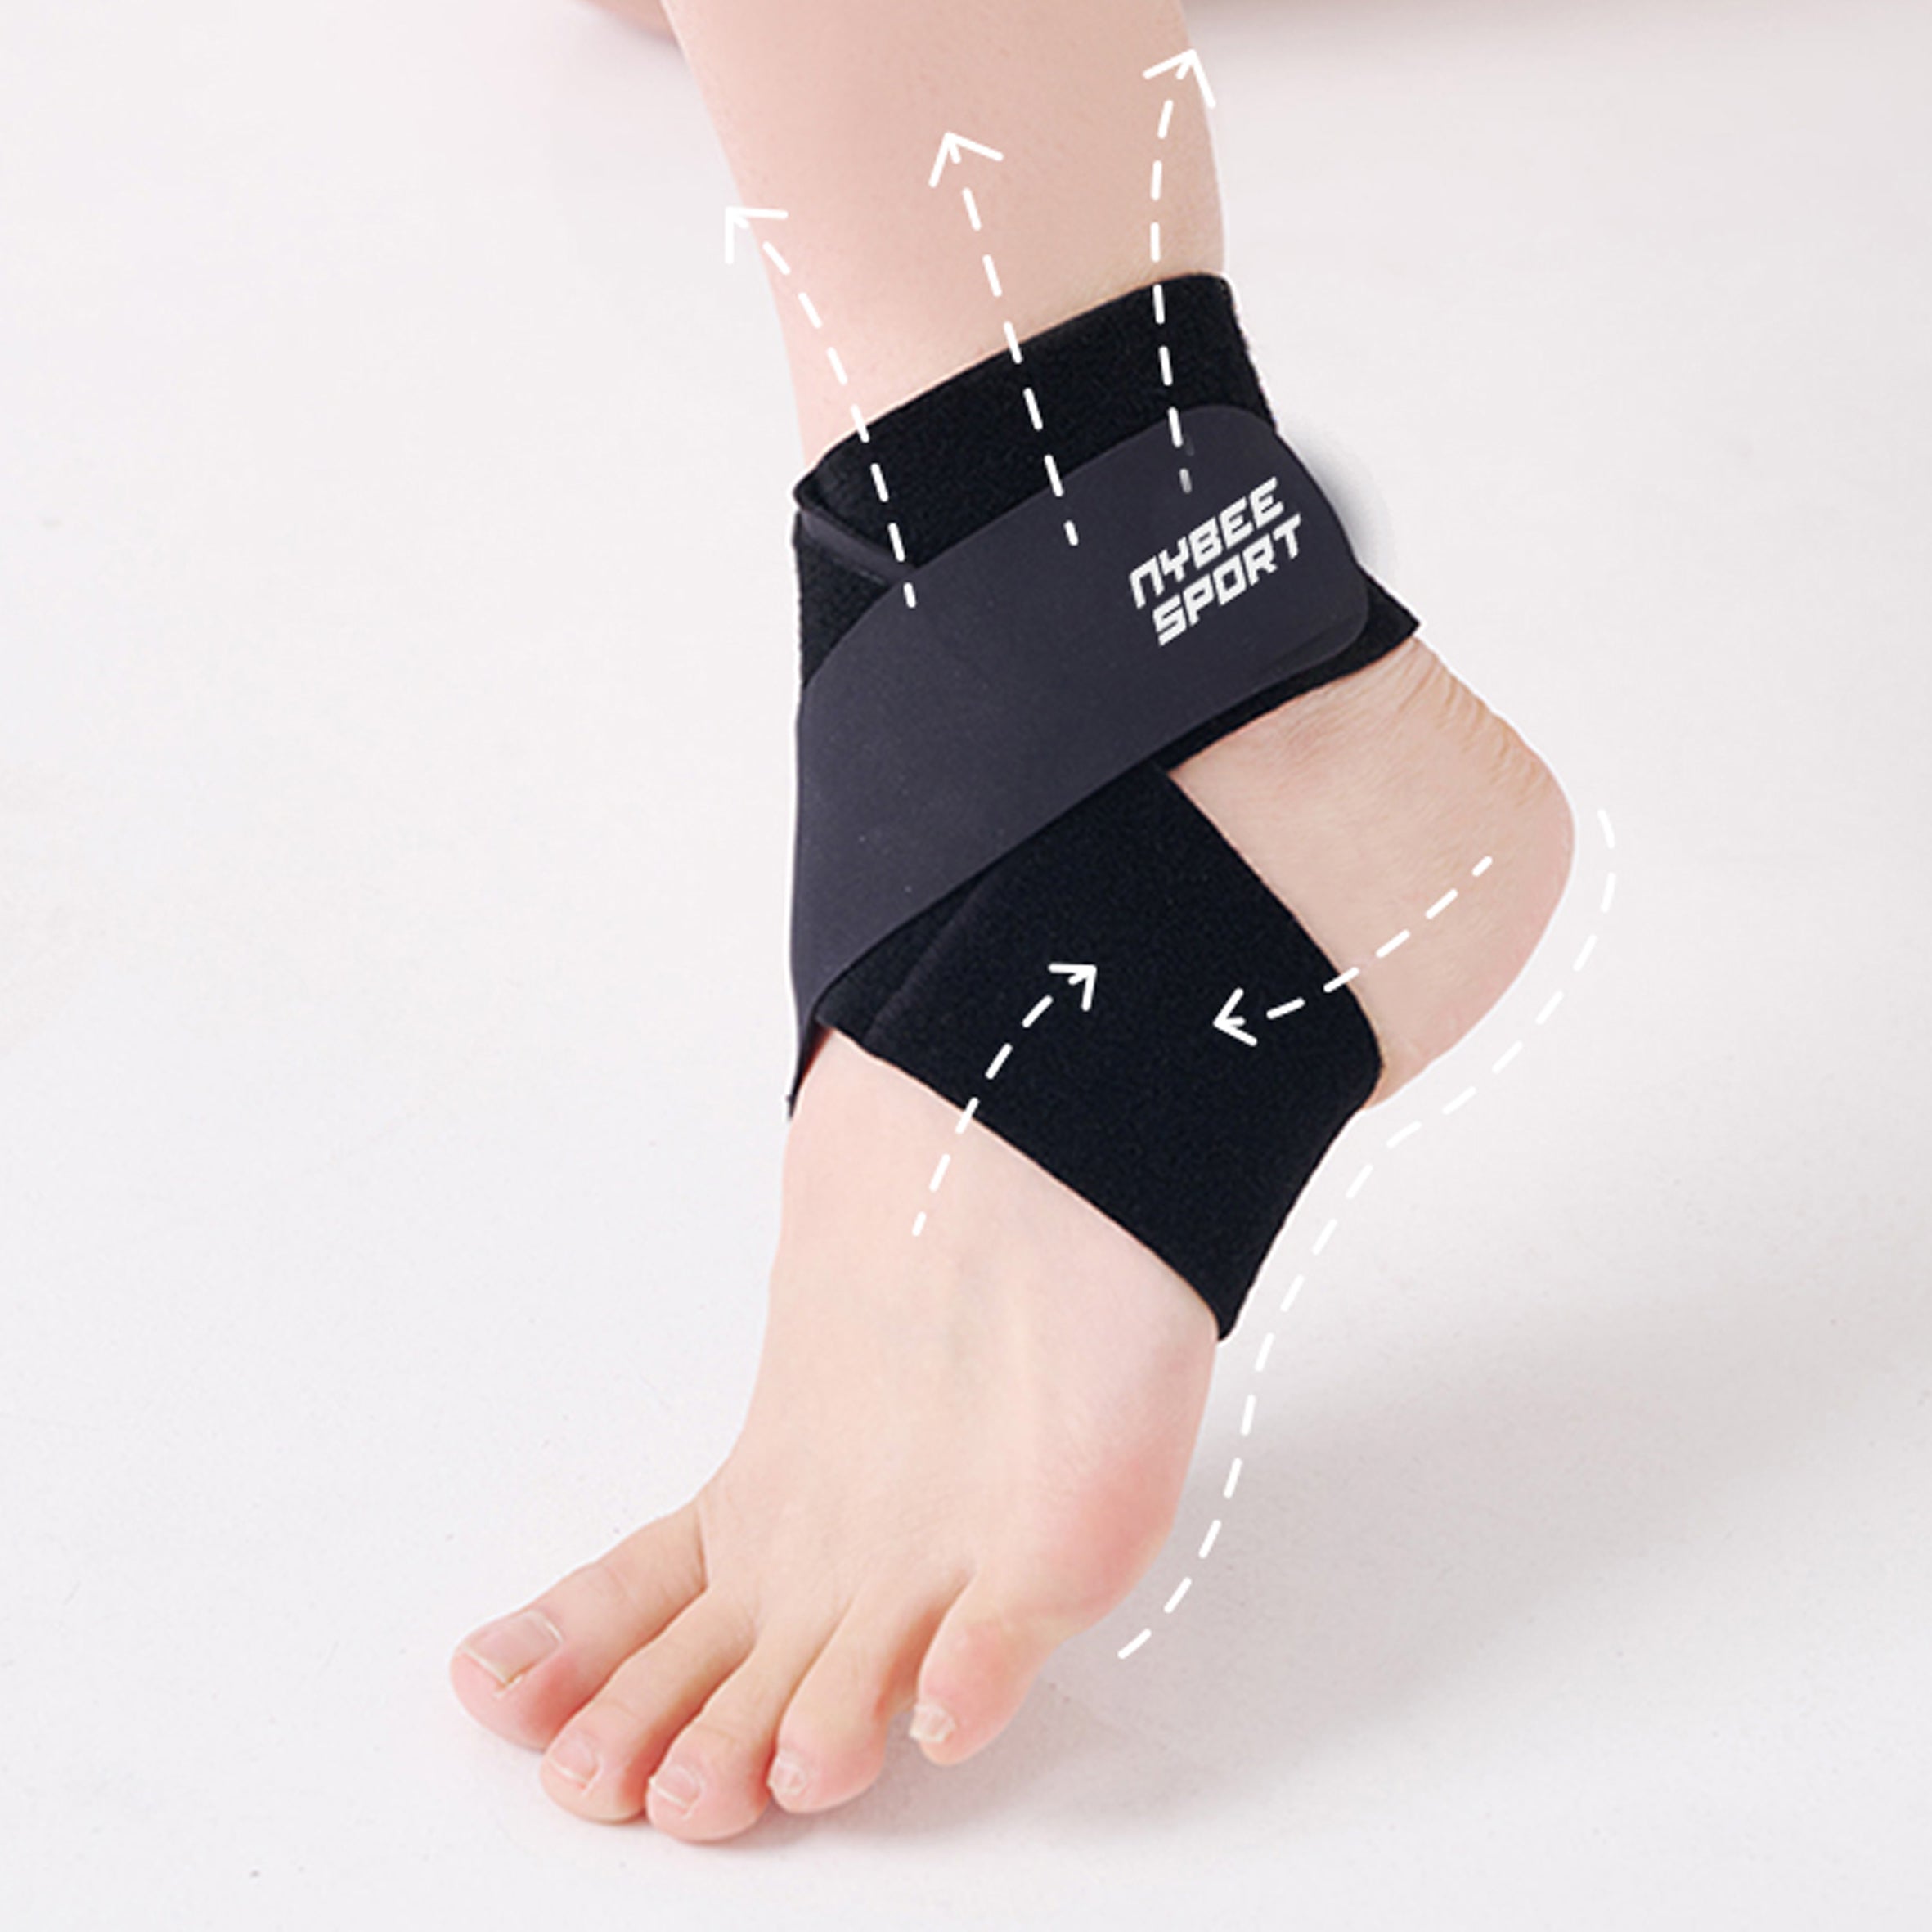 Mach8 Ankle Brace  from $30 at Thrive Orthopedics